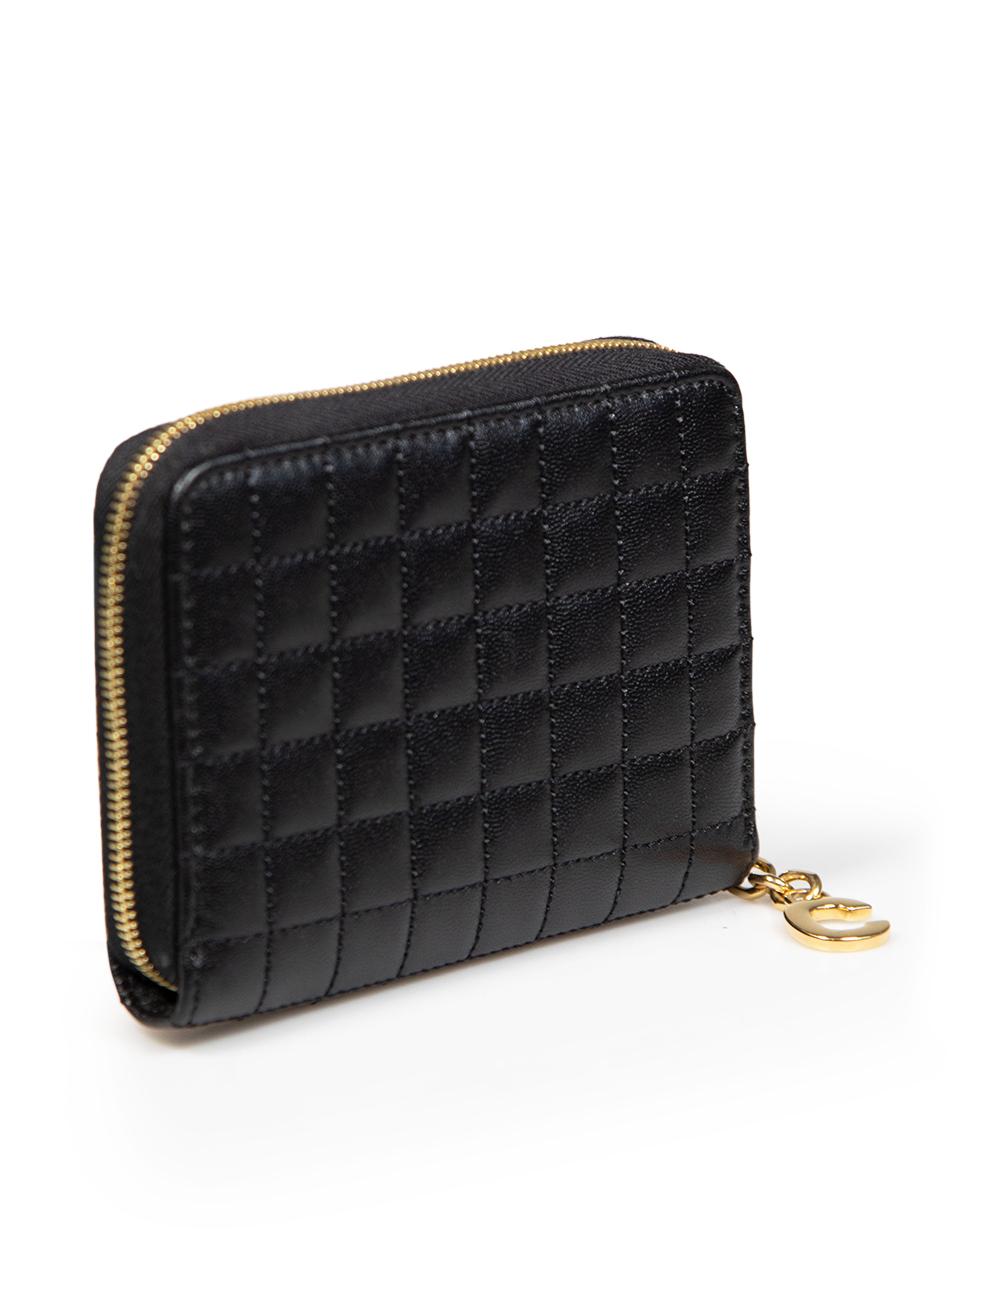 CONDITION is Very good. Hardly any visible wear to the wallet is evident on this used Céline designer resale item.
 
 
 
 Details
 
 
 Black
 
 Leather
 
 Wallet
 
 Zp around
 
 Quilted
 
 Gold tone hardware
 
 'C' Logo zip charm
 
 2x Main